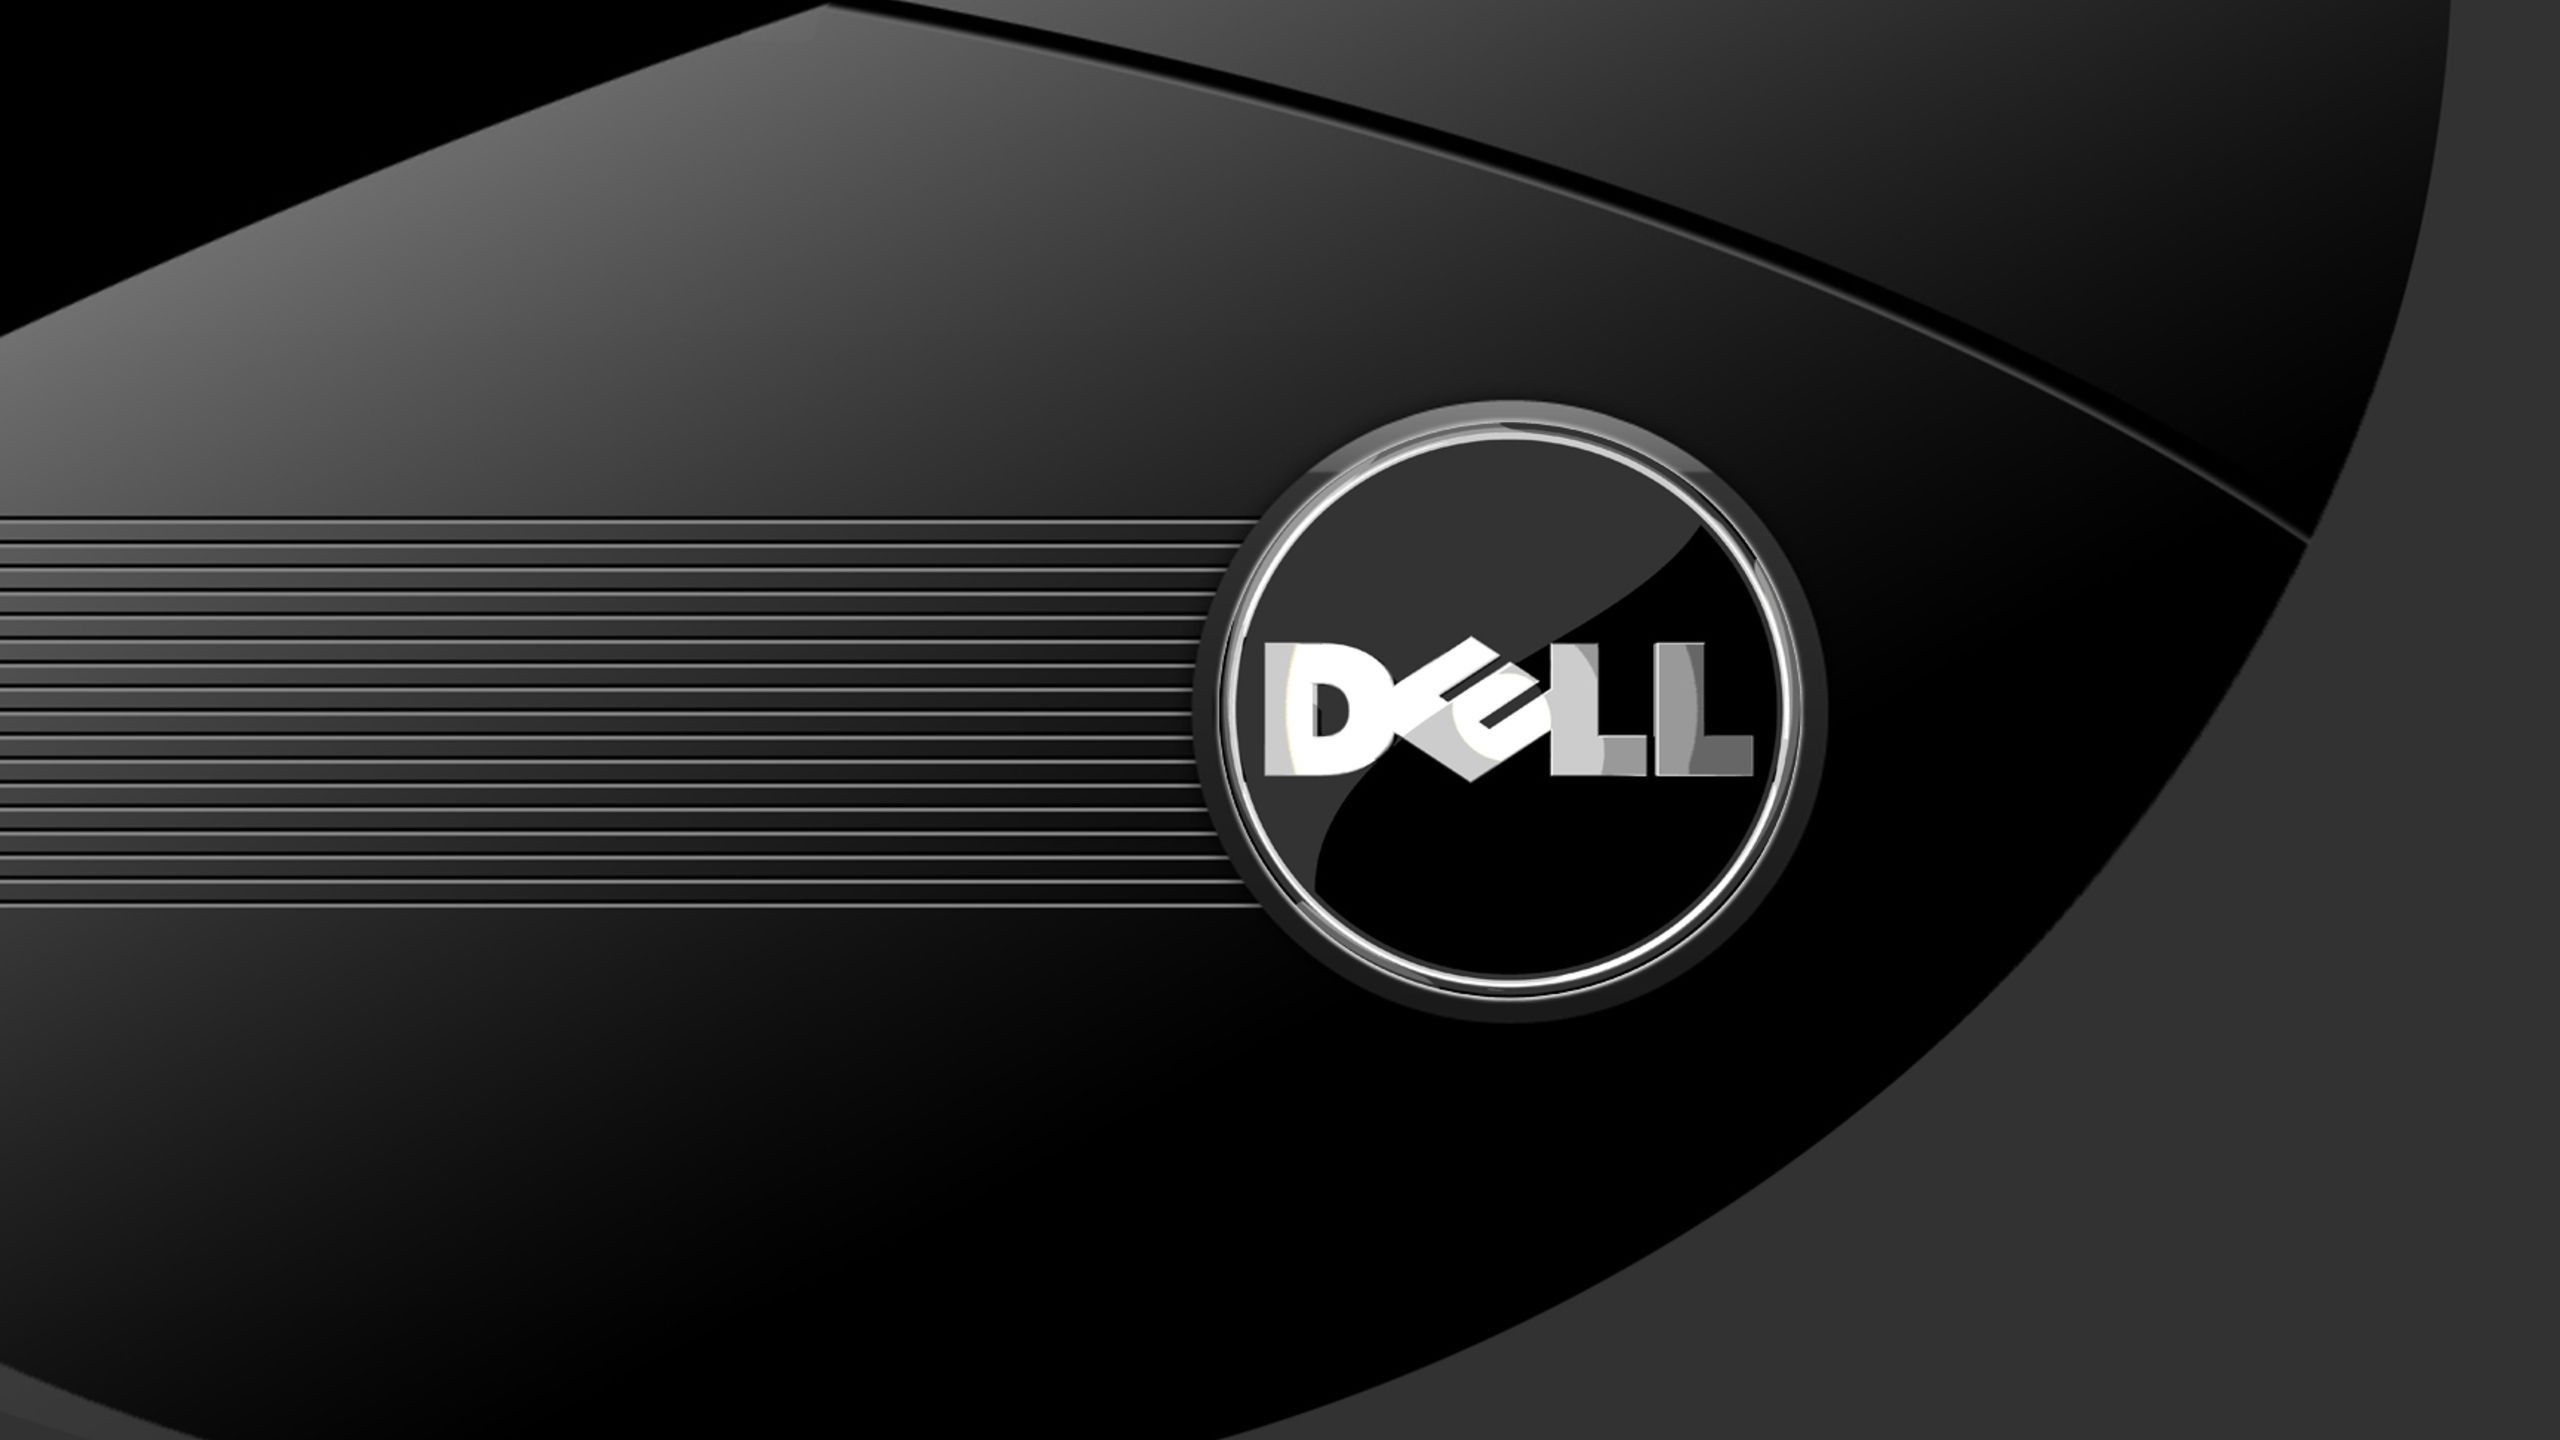 30 Dell HD Wallpapers and Backgrounds